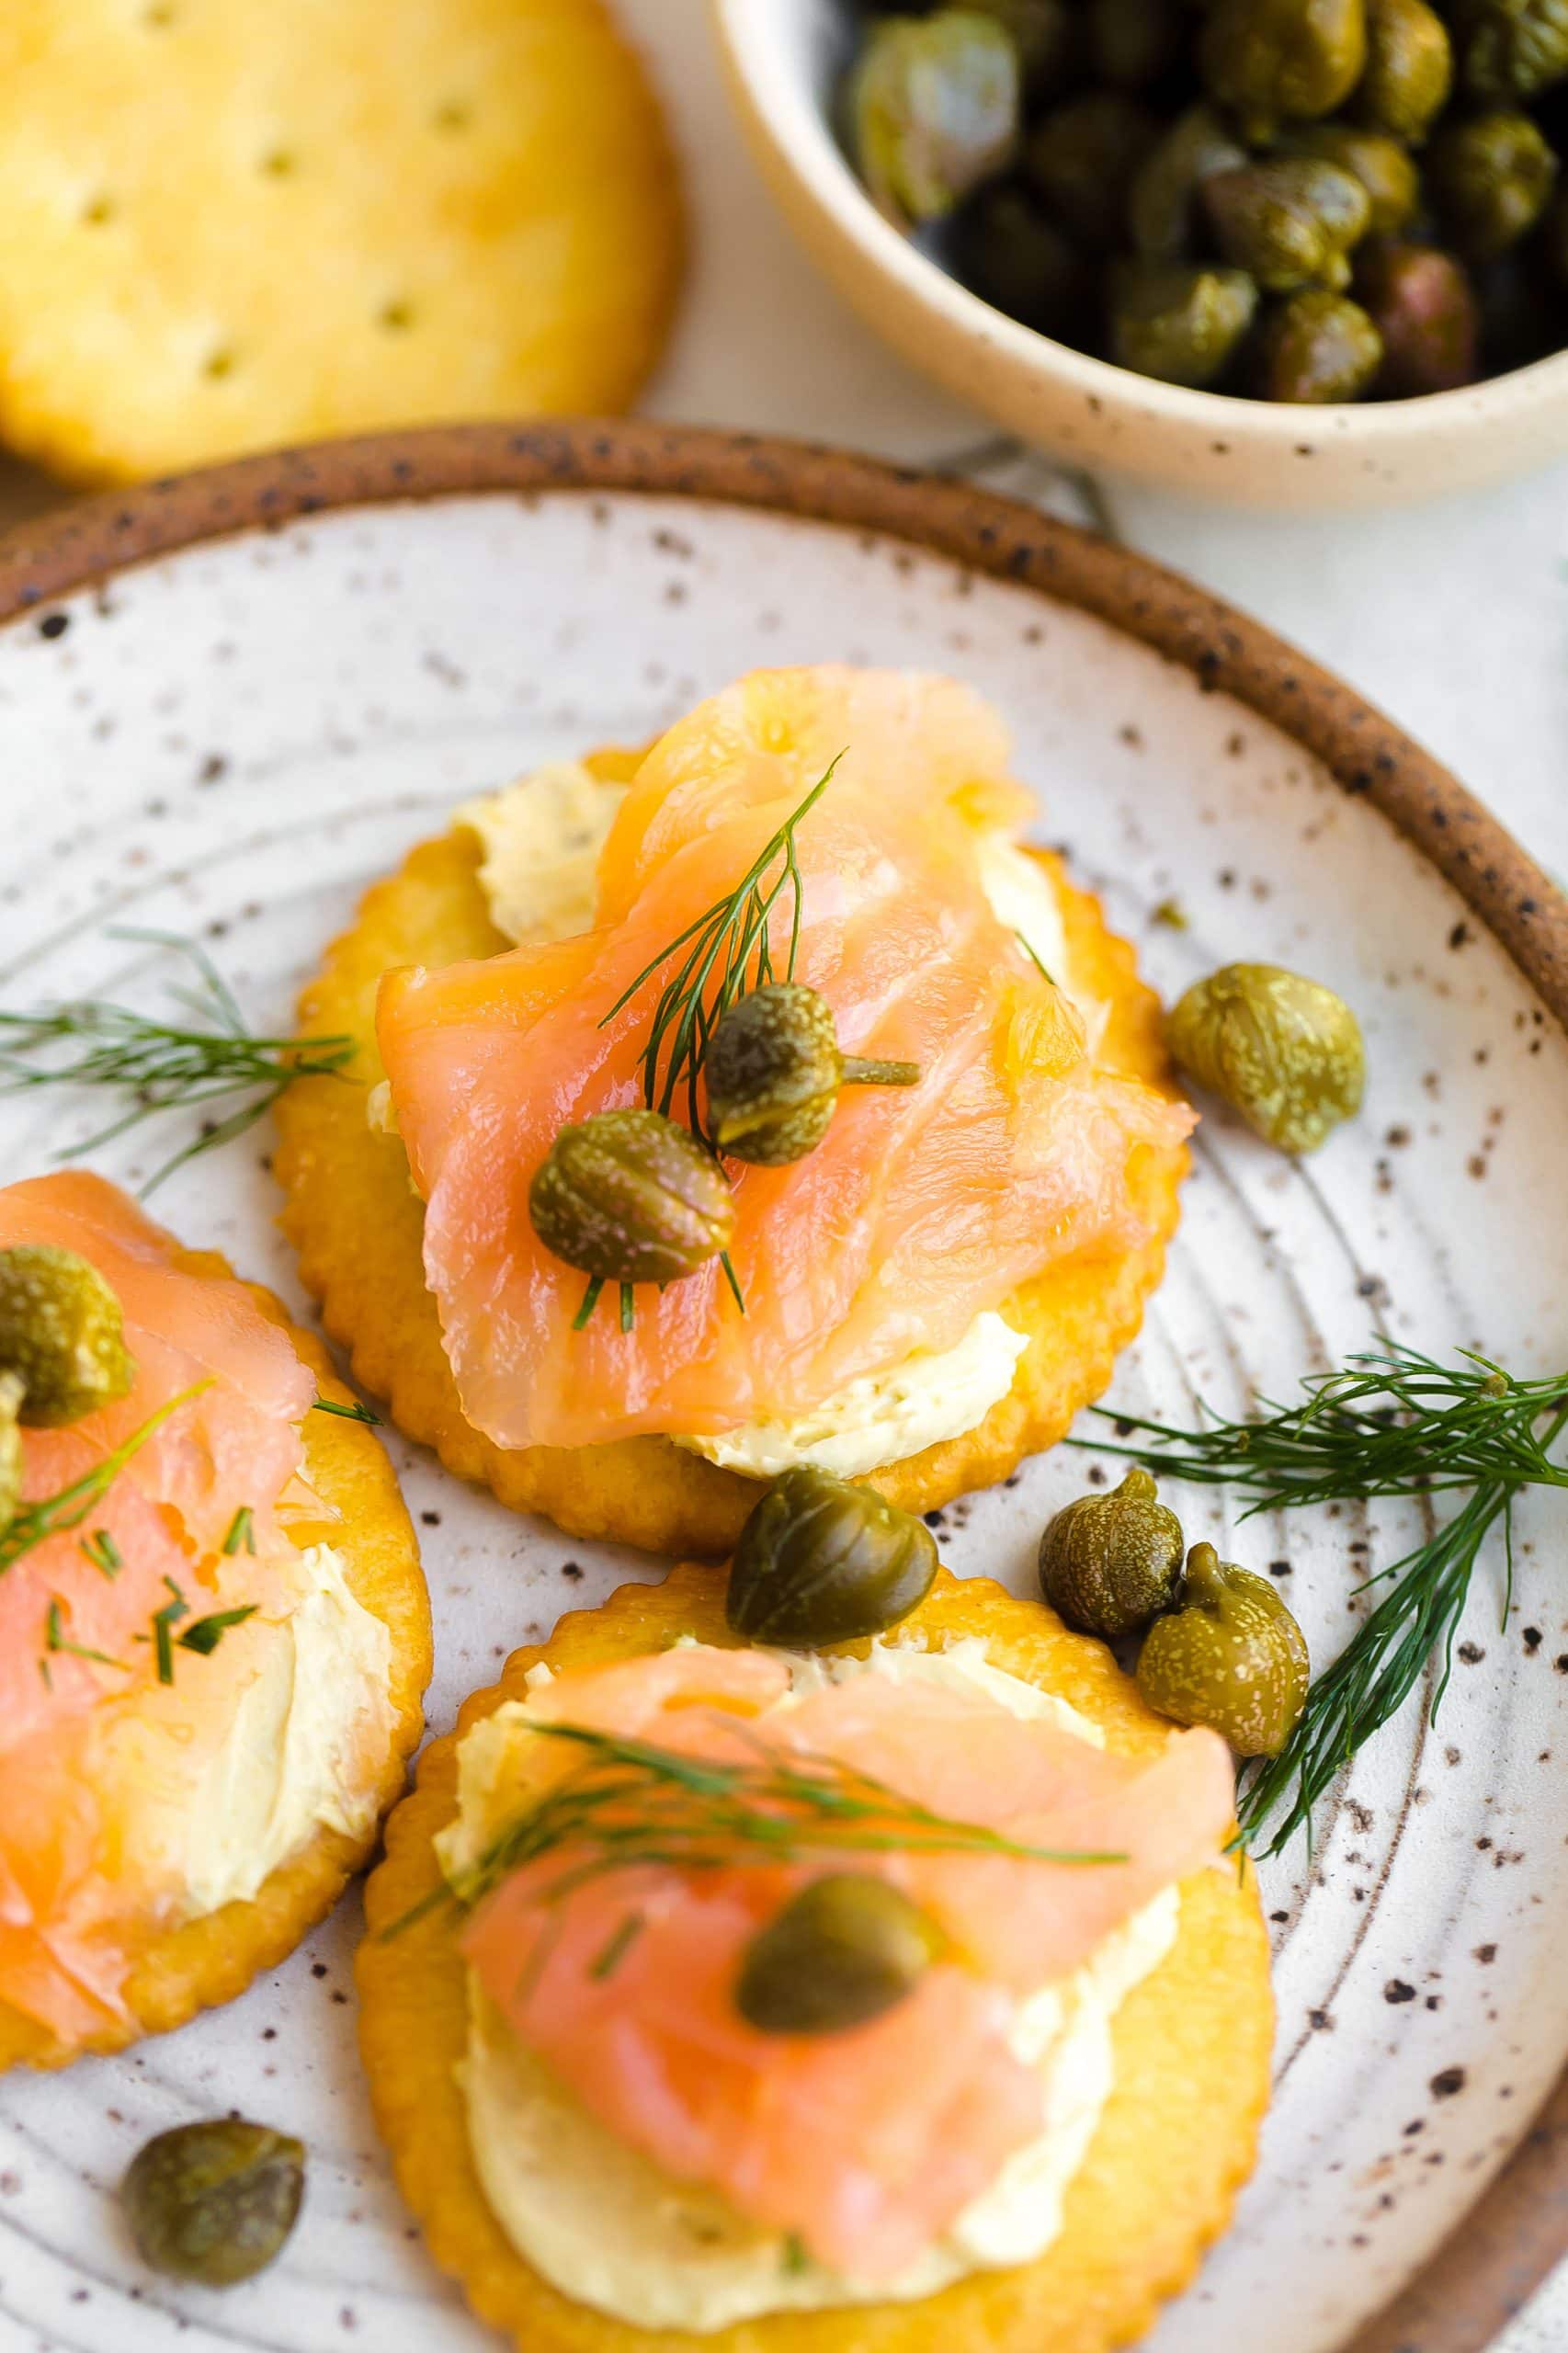 Buttery cracker with smoked salmon on a small speckled plate.